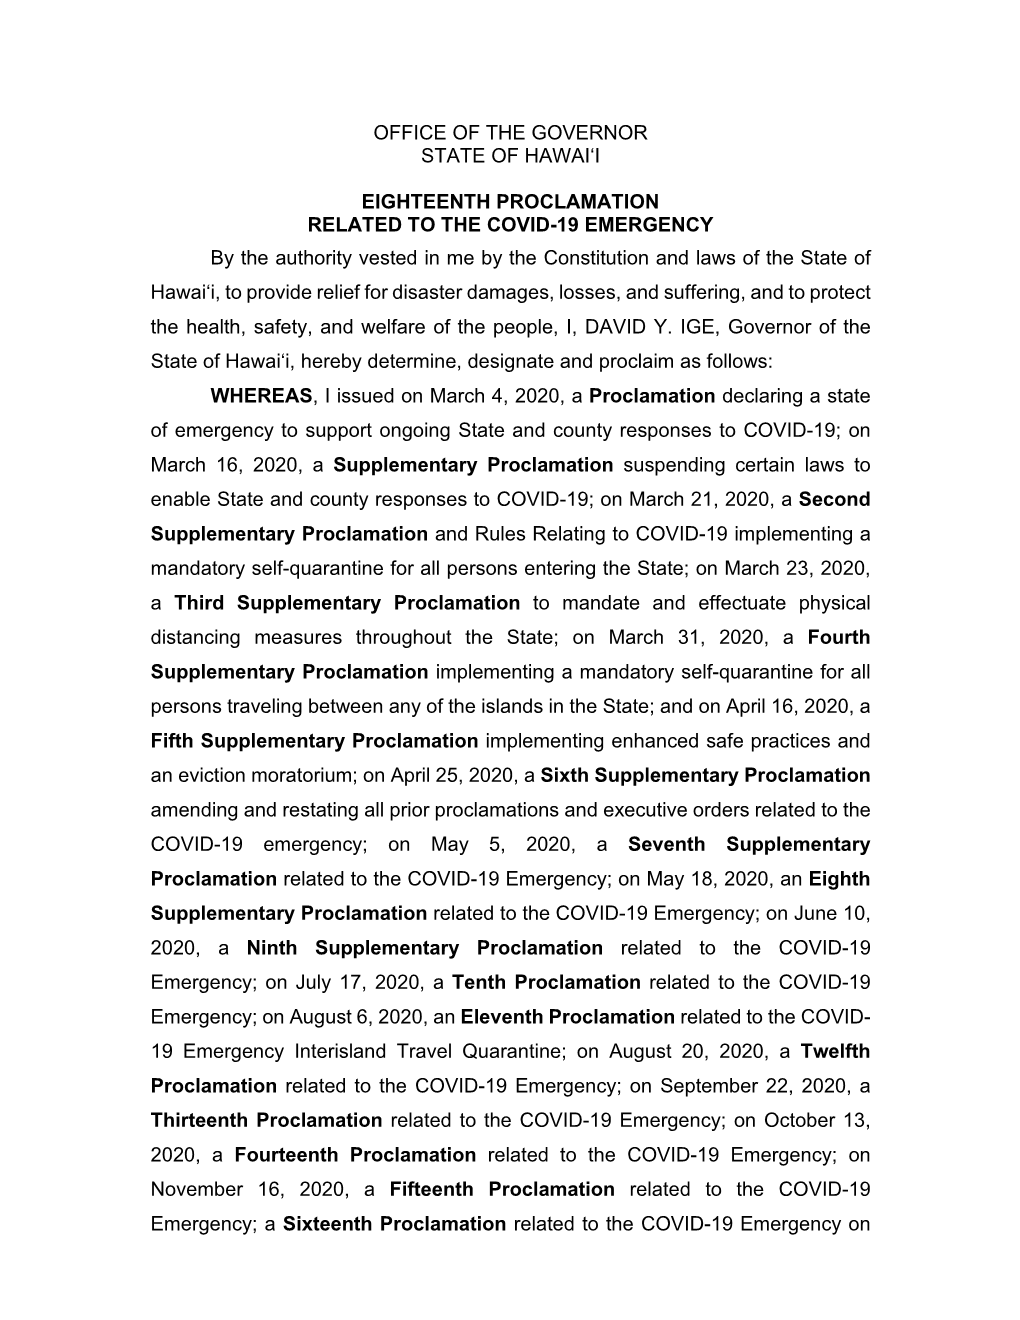 Eighteenth Proclamation Related to the COVID-19 Emergency